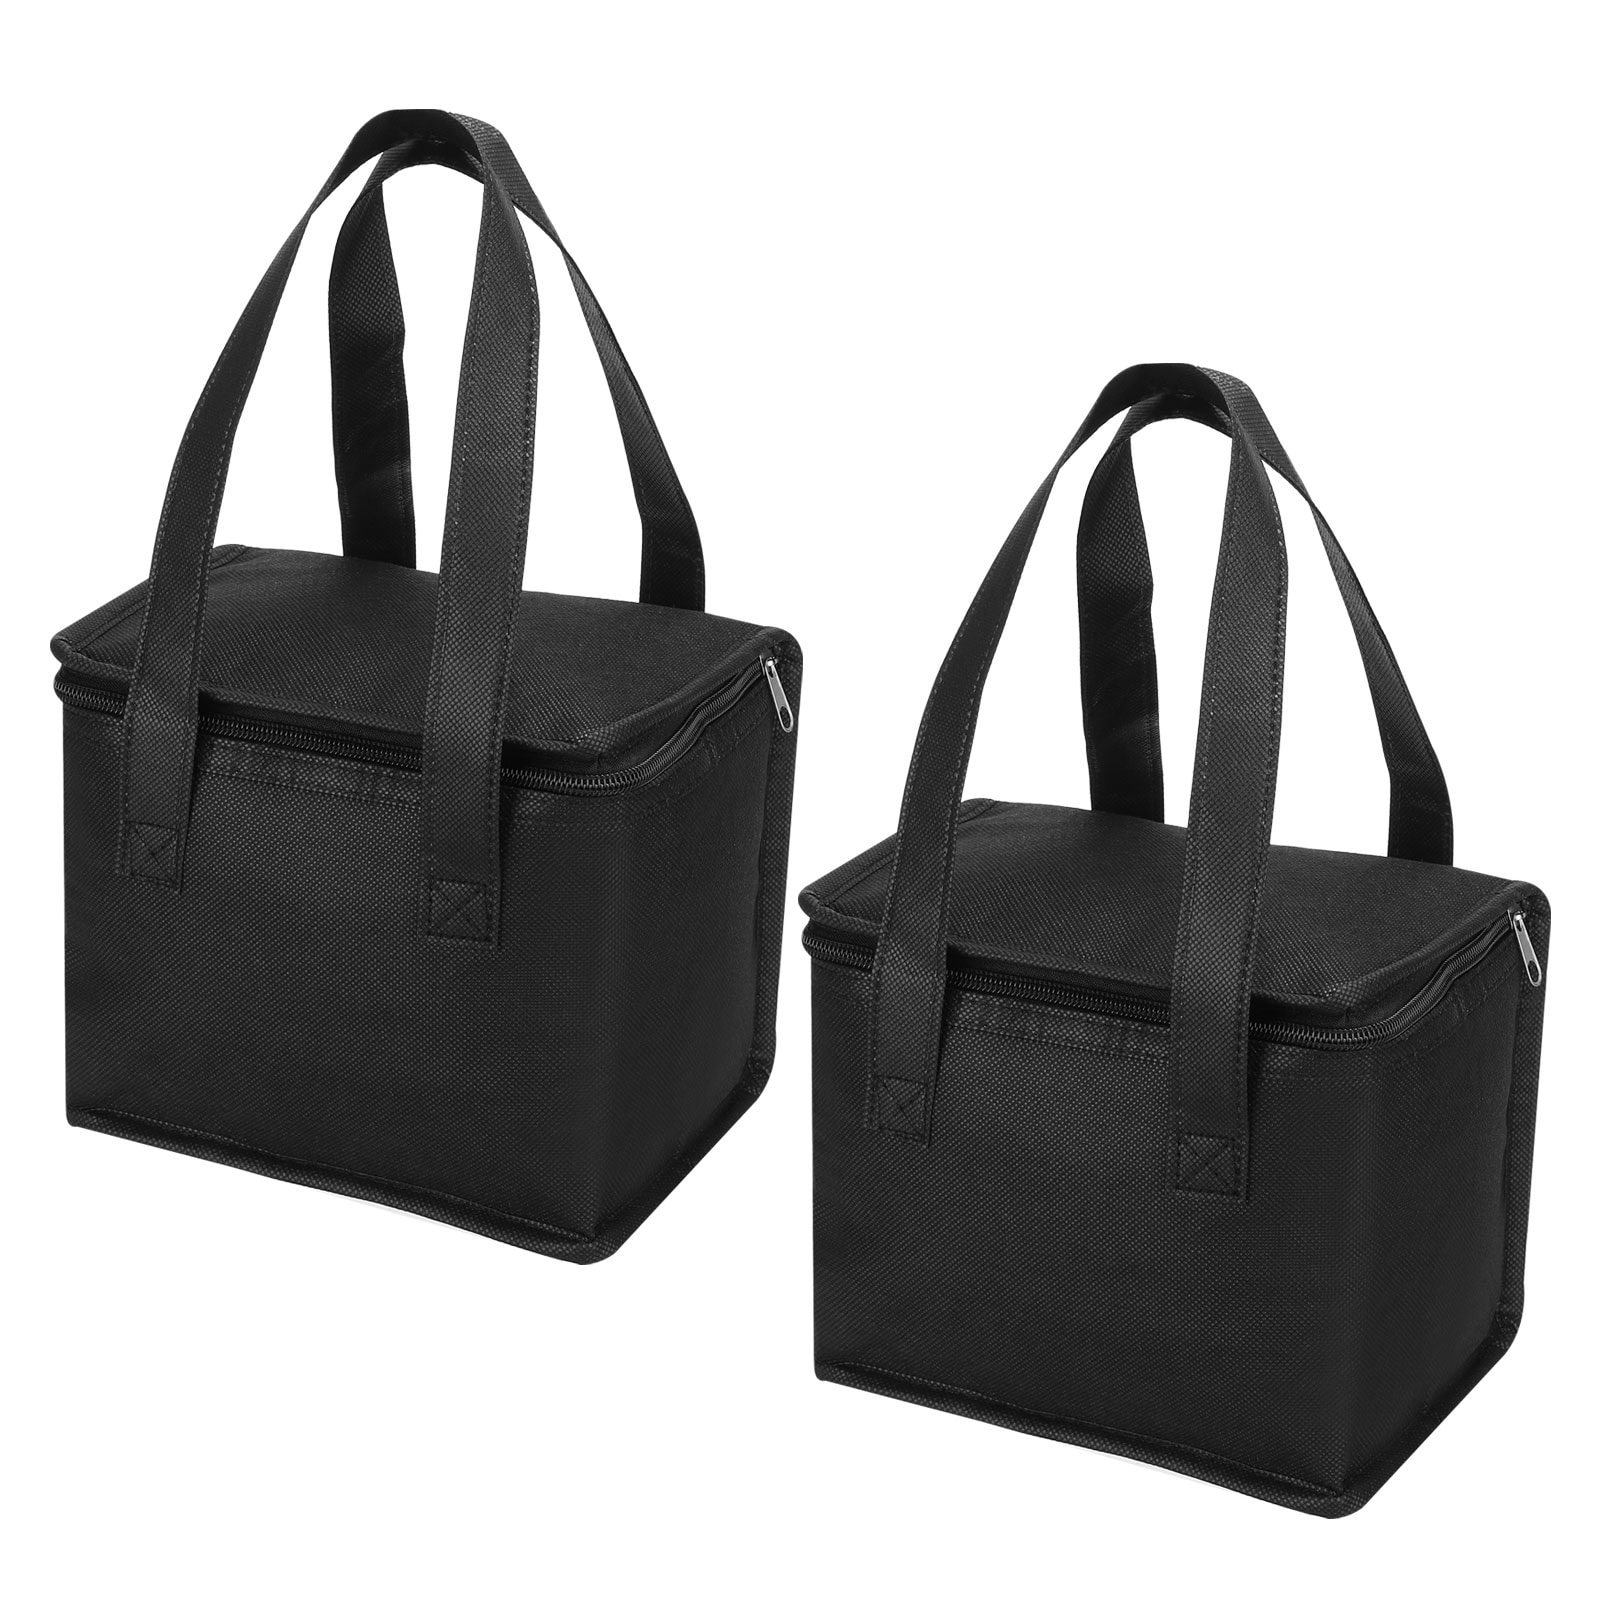 2Pcs 8.3"x5.5"x6.7" Insulated Reusable Grocery Bag Food Delivery Tote Bag, Black